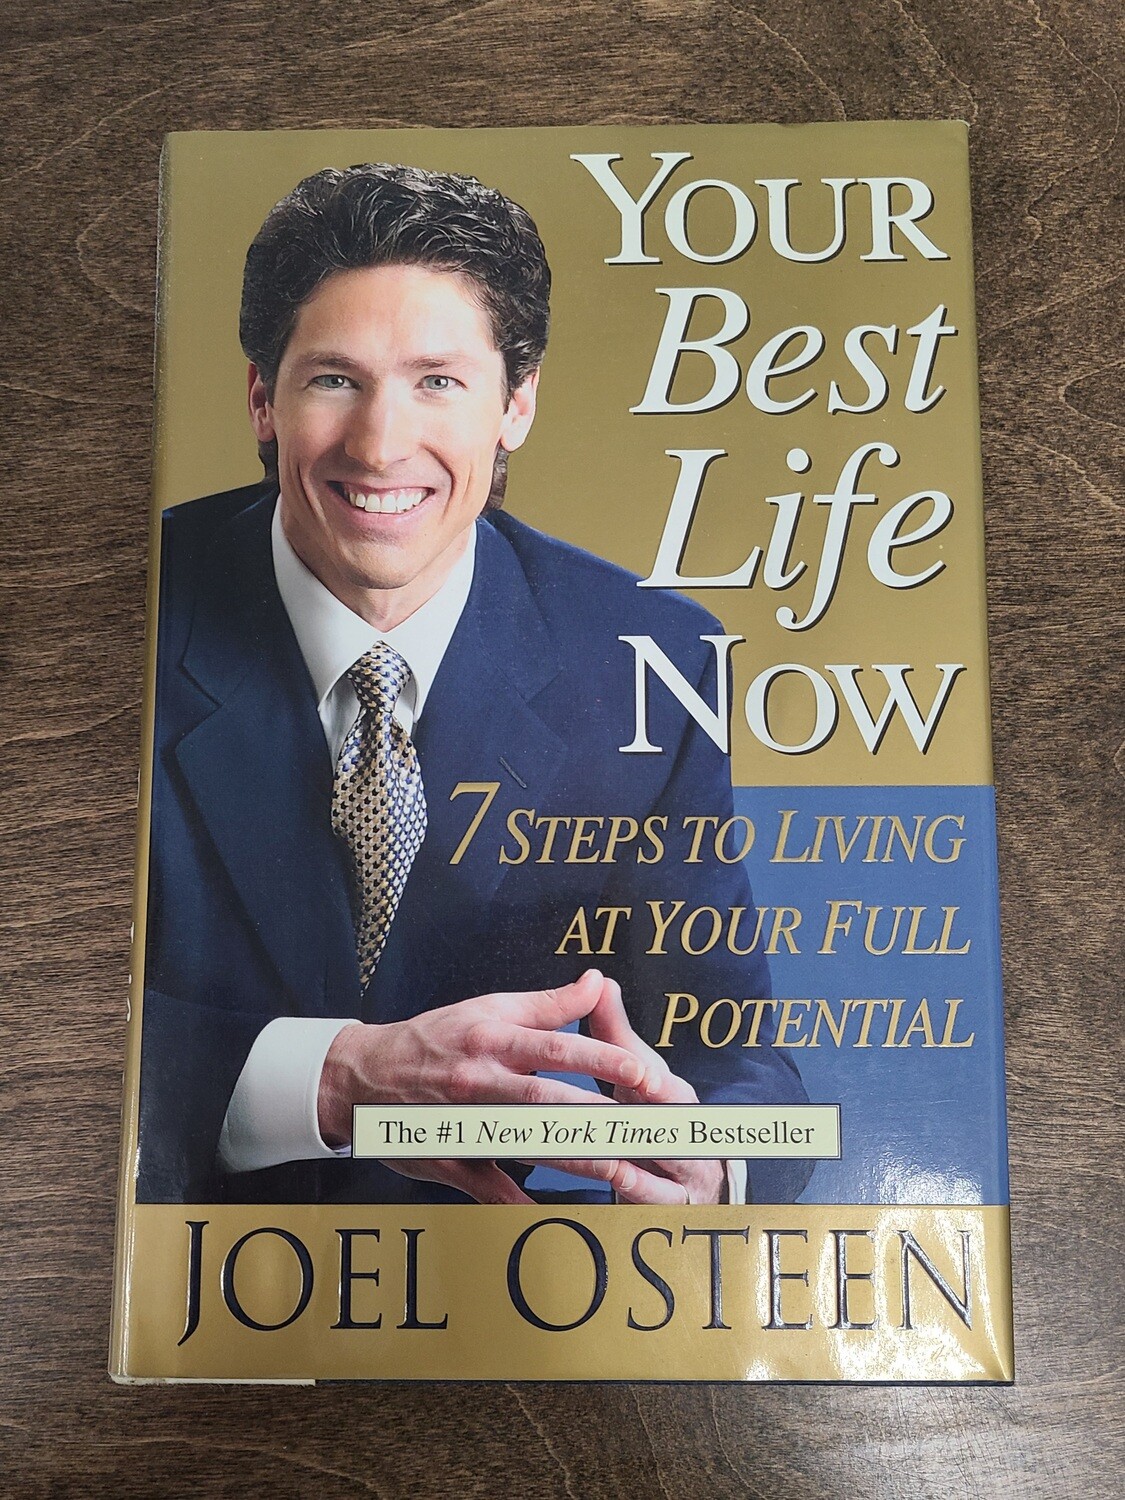 Your Best Life Now: 7 Steps to Living at Your Full Potential by Joel Osteen